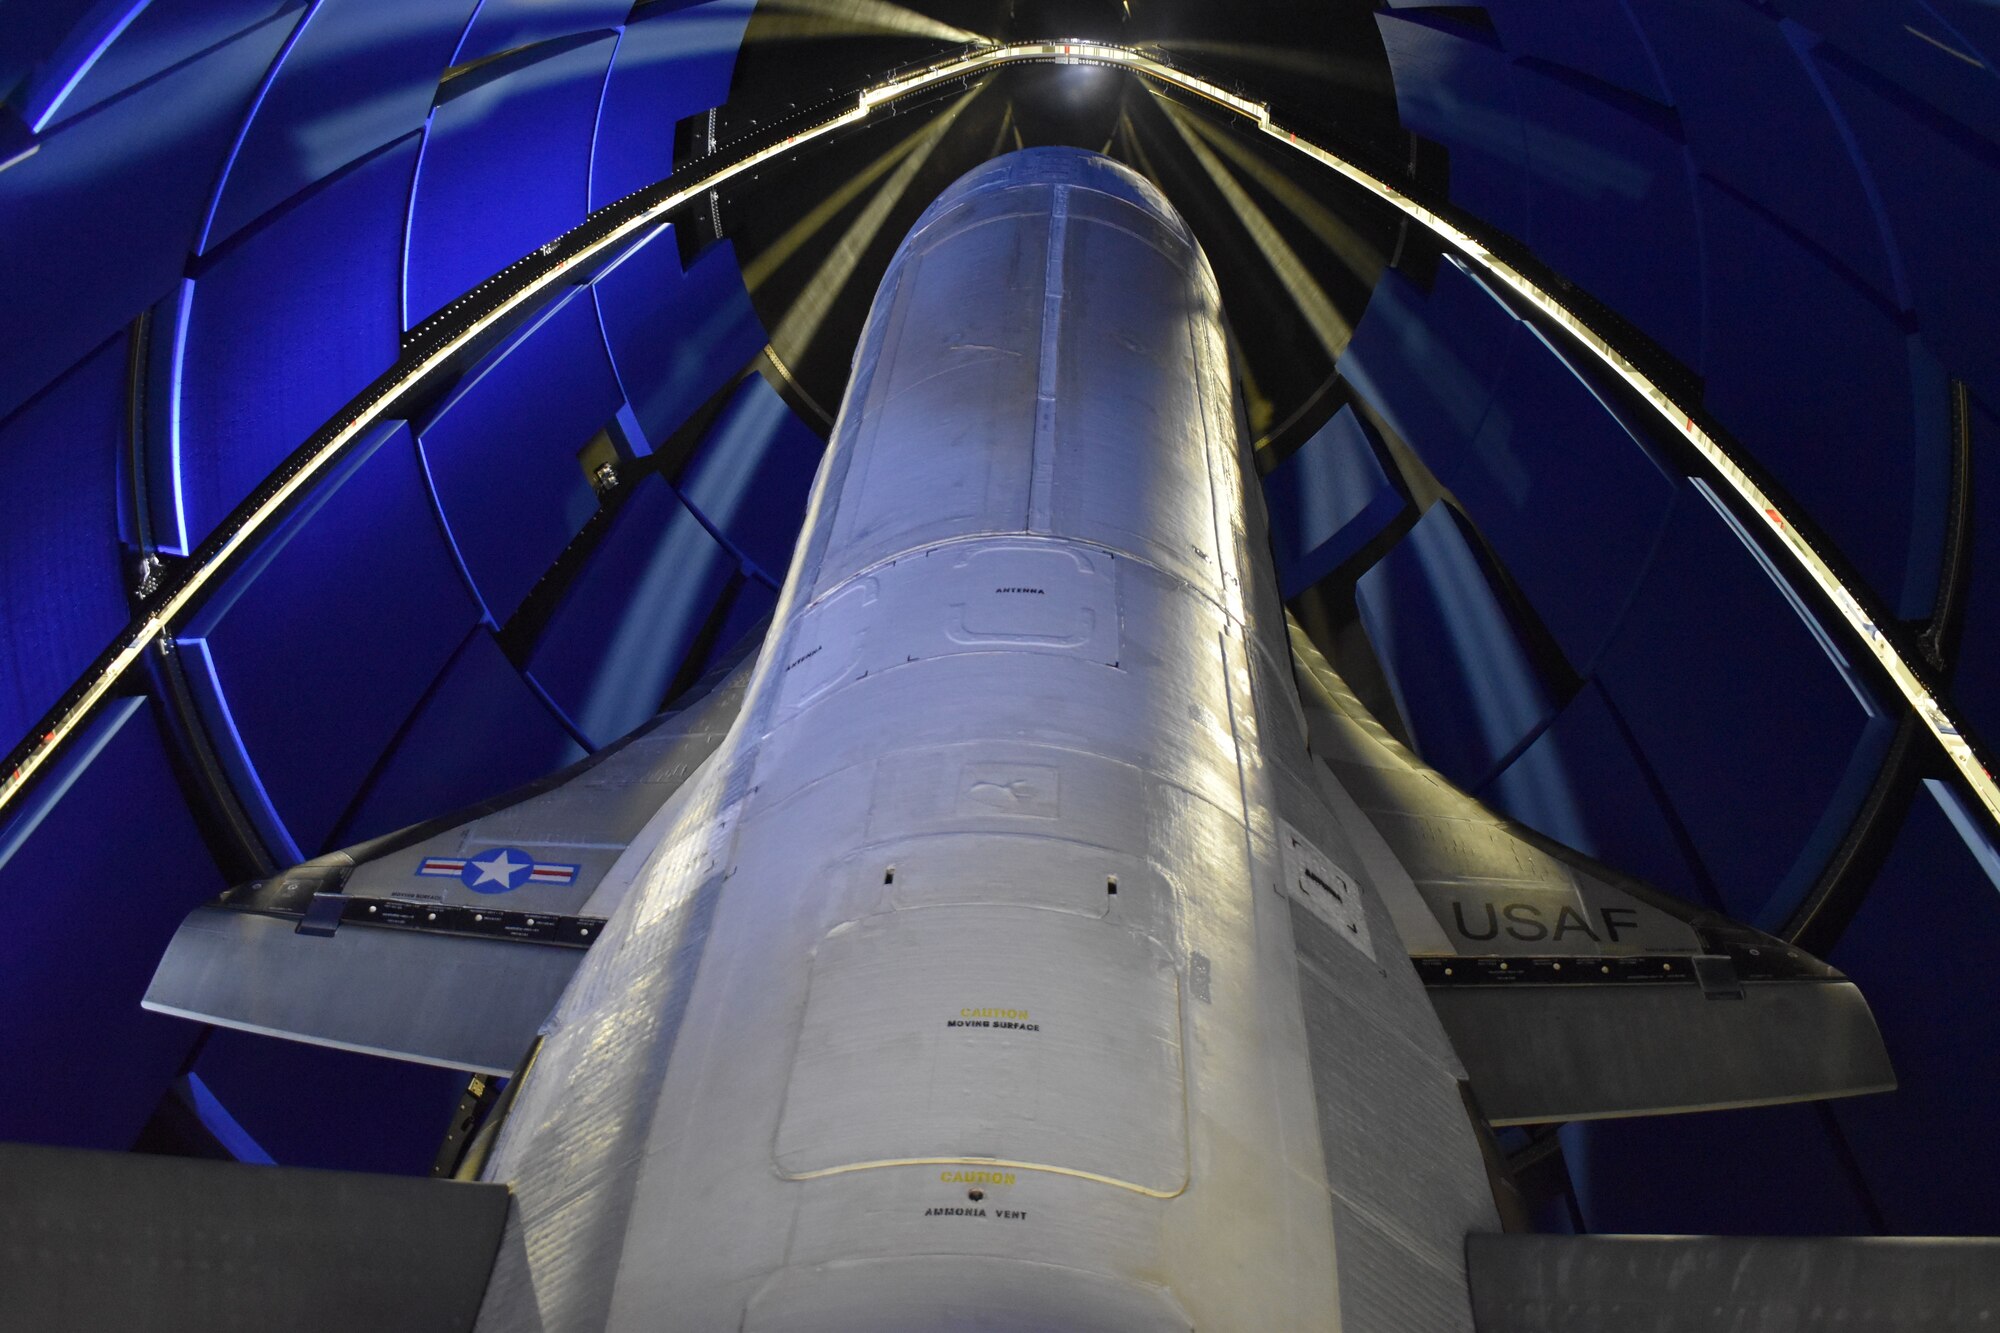 Encapsulated X-37B Orbital Test Vehicle for United States Space Force-7 mission (Courtesy of Boeing)